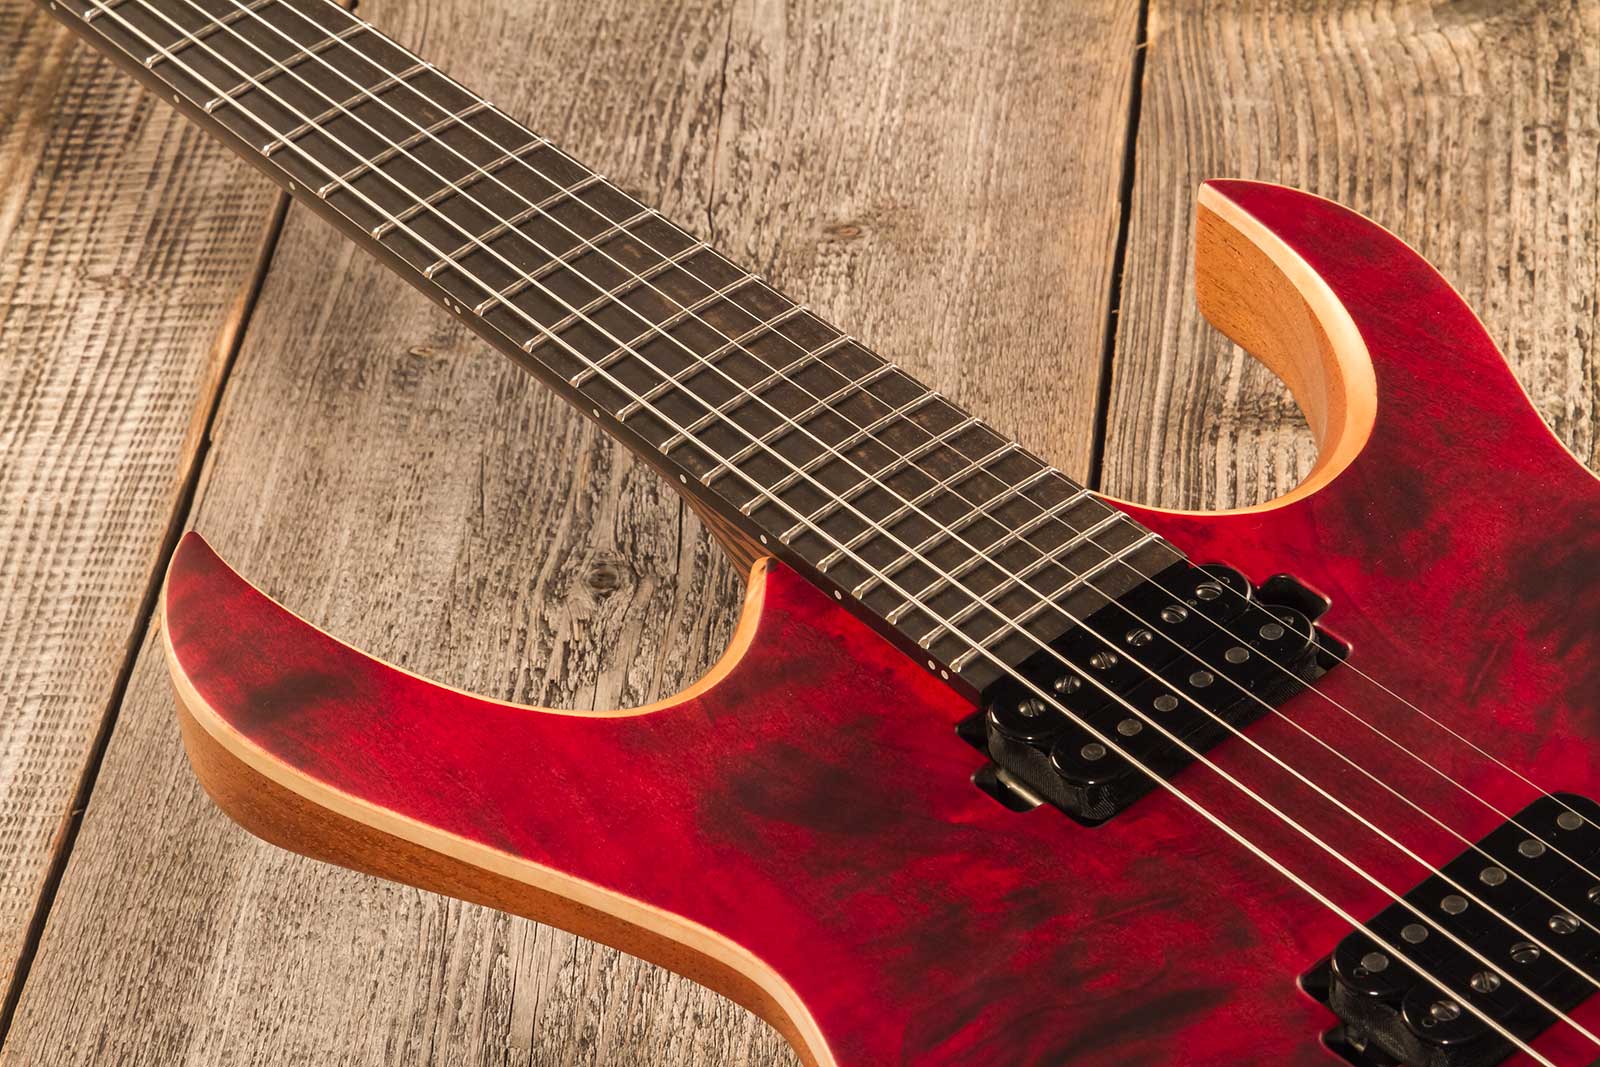 Mayones Guitars Duvell Elite 6 2h Bare Knuckle Ht Eb #df2301294 - Trans Dirty Red Satine - Guitarra electrica metalica - Variation 4